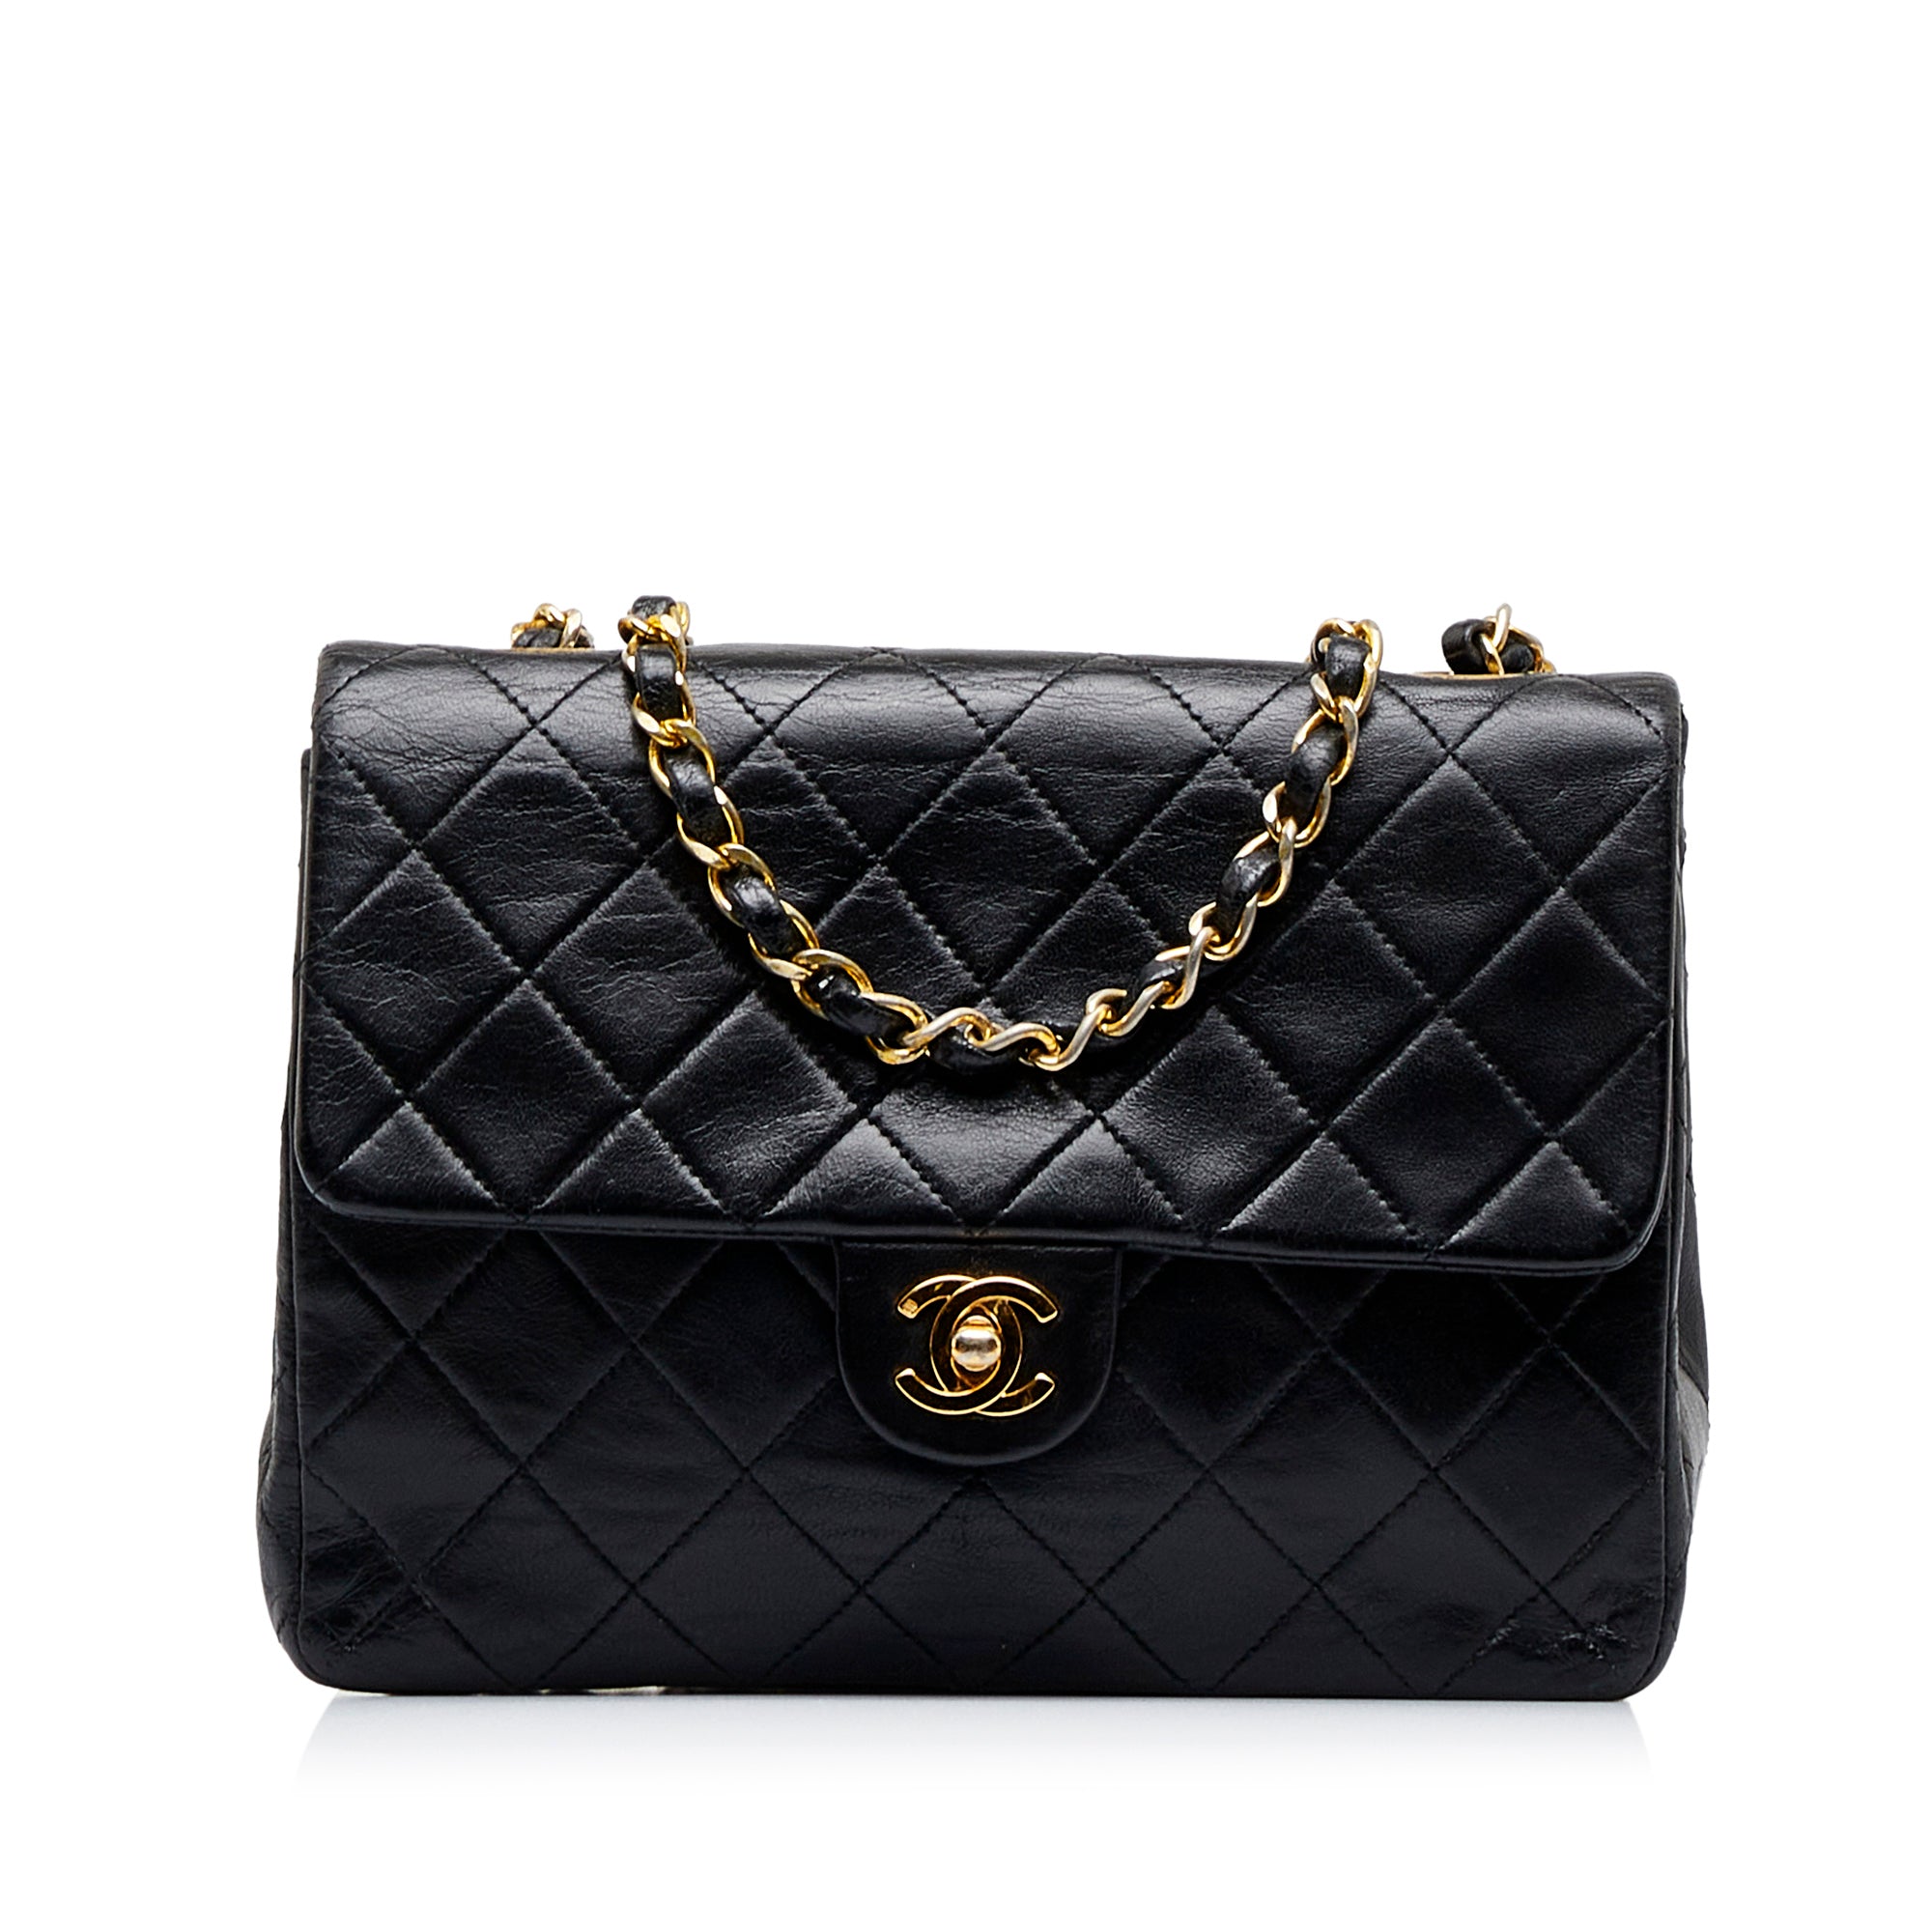 Chanel Small Black Flap Bag - 326 For Sale on 1stDibs